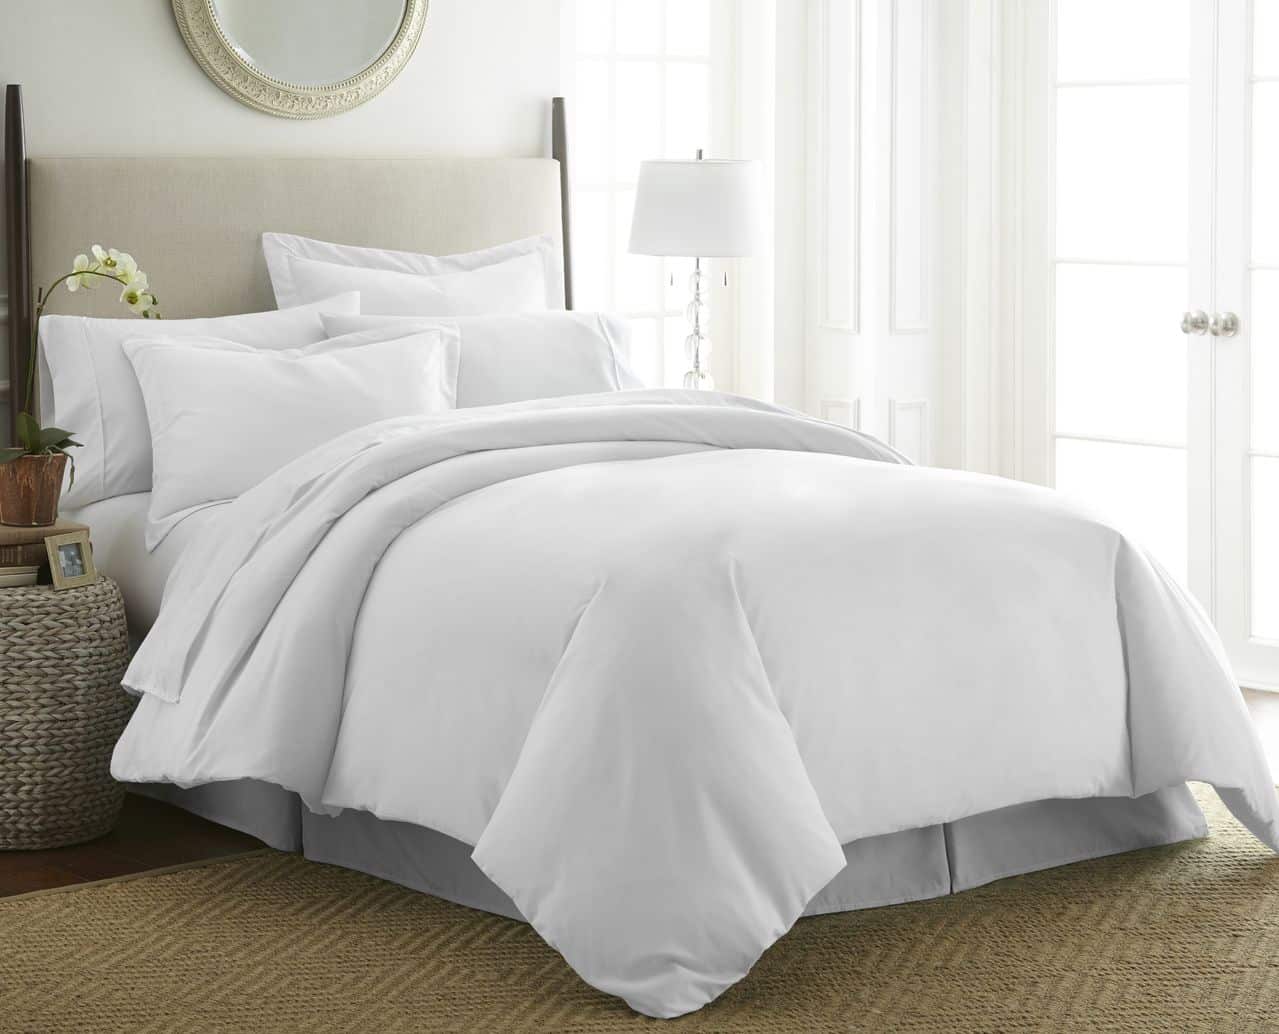 Washed Linen-Bedding for California Style